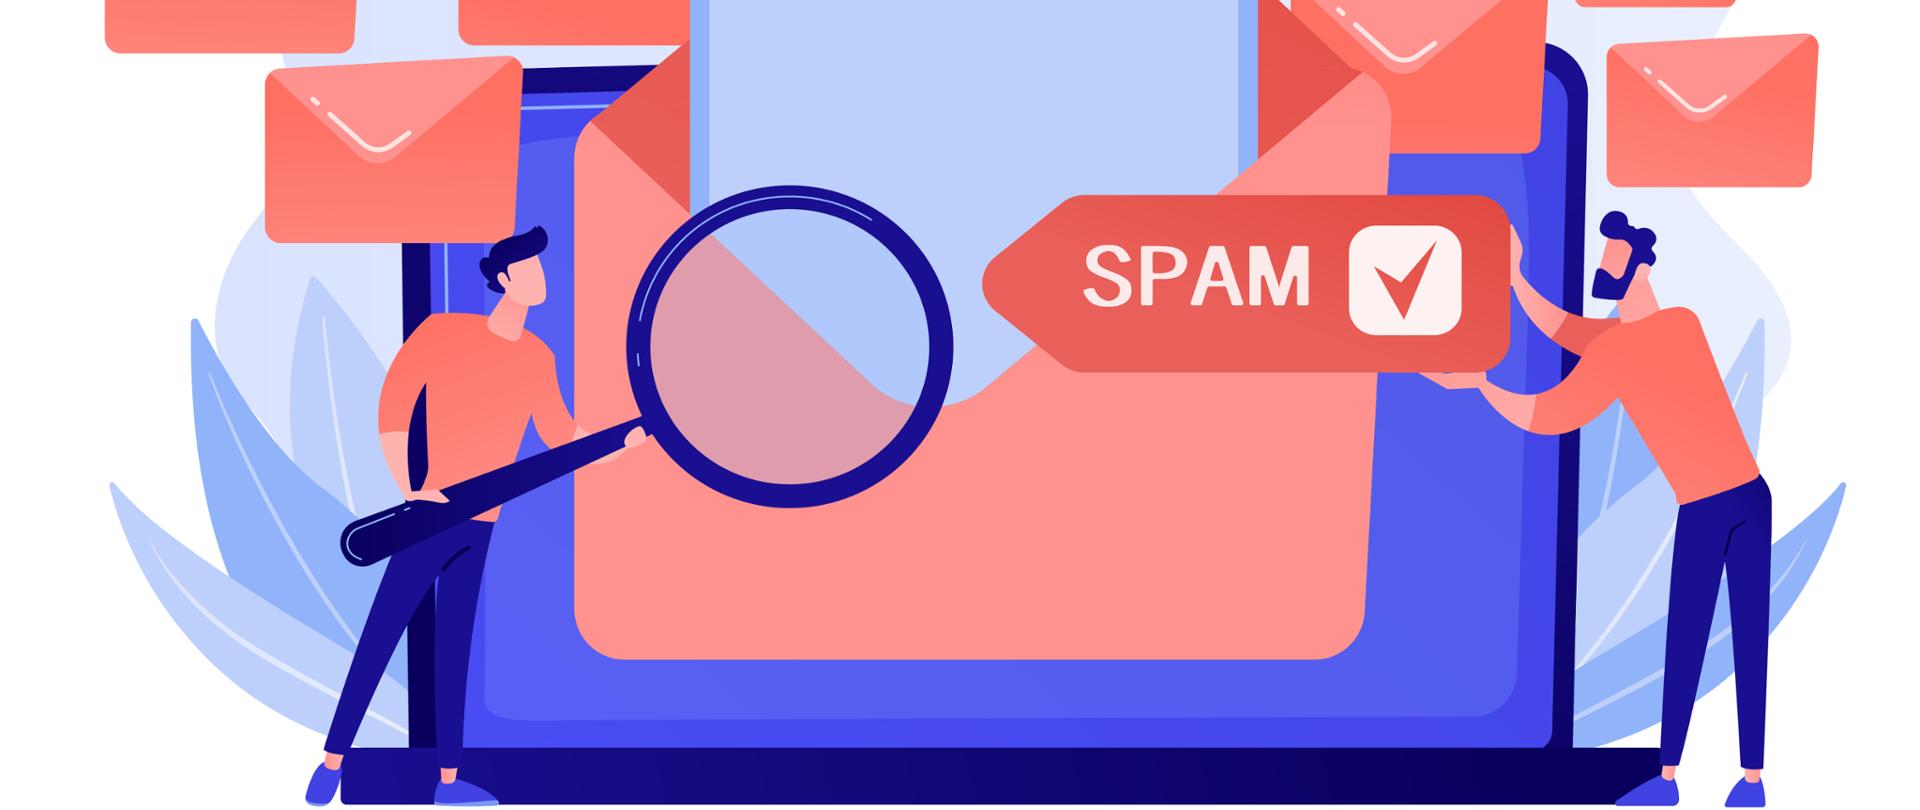 Businessmen get advertising, phishing, spreading malware irrelevant unsolicited spam message. Spam, unsolicited messages, malware spreading concept. Pinkish coral bluevector isolated illustration